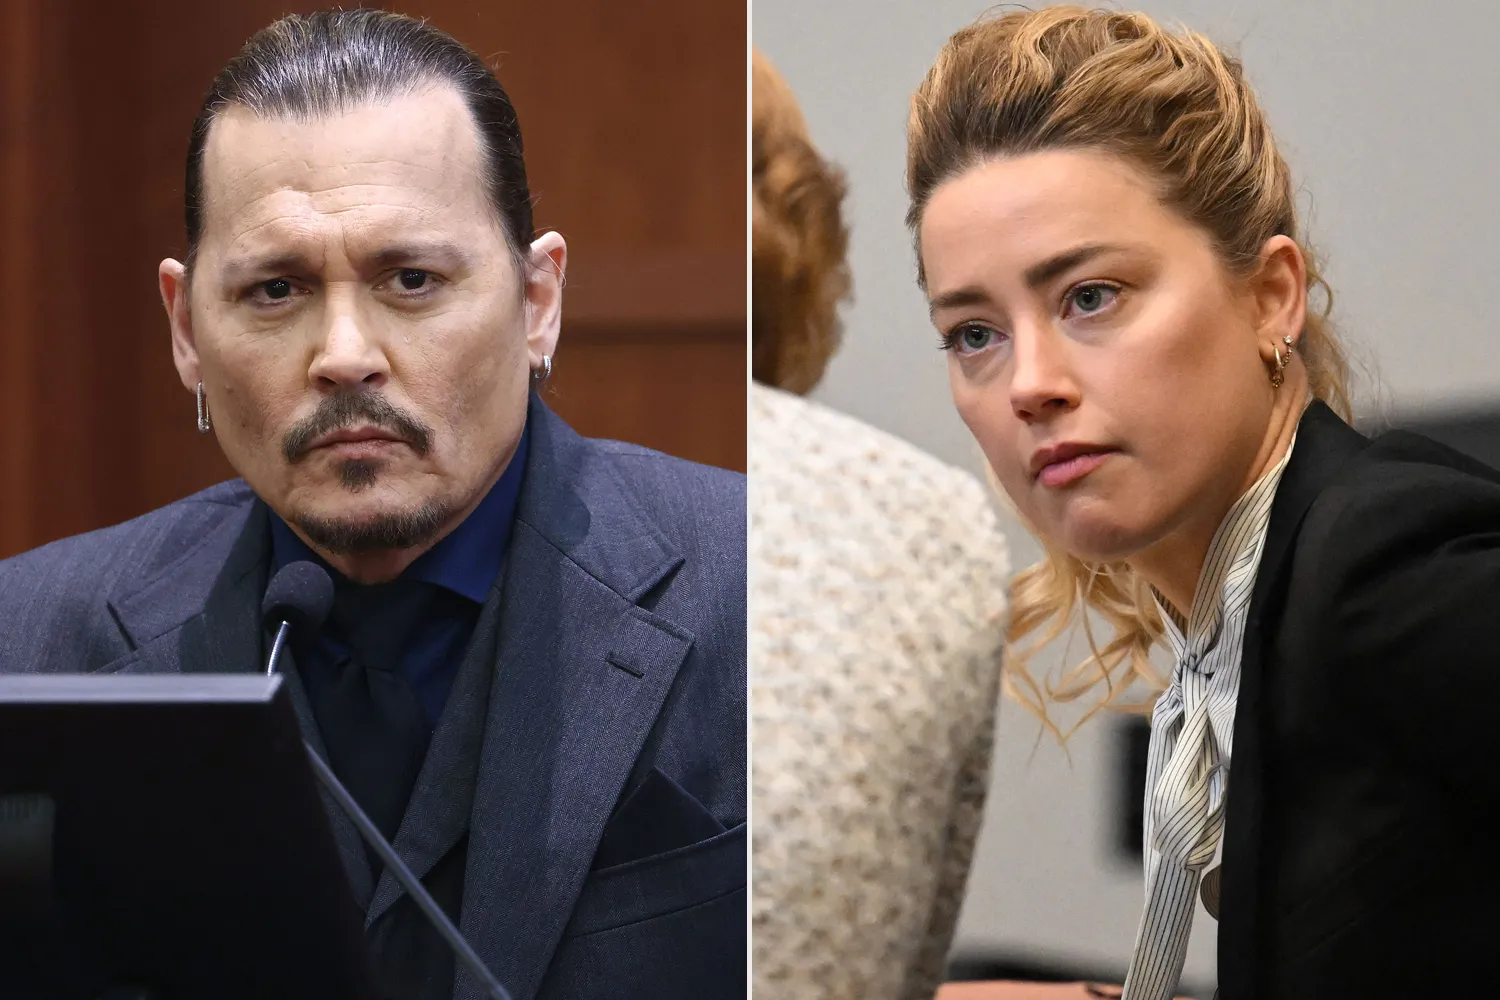 Psychologist Testifies Johnny Depp Forced Himself on Amber Heard When Angry  - Animated Times